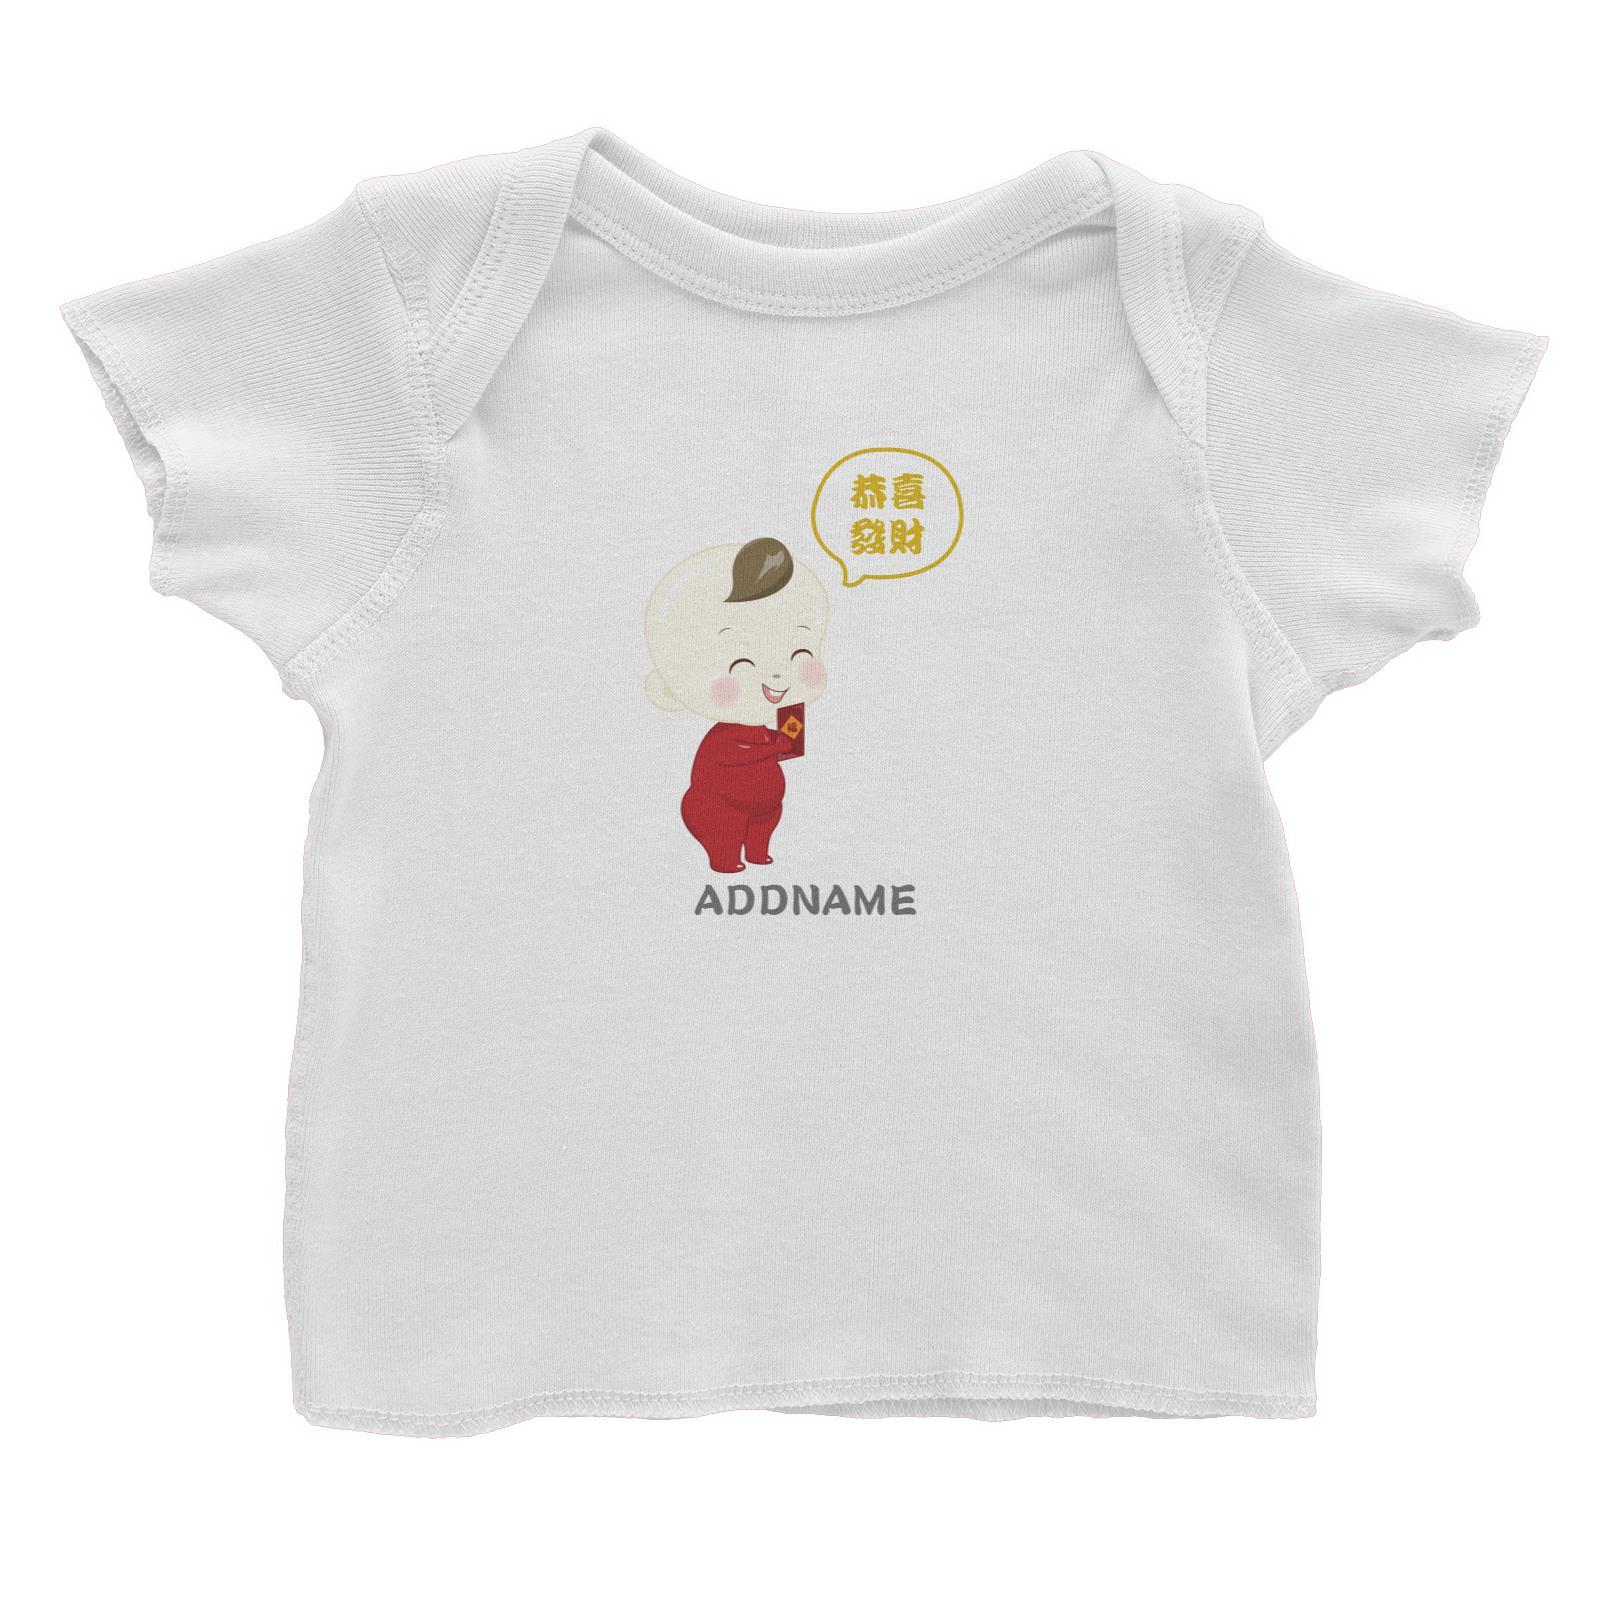 Chinese New Year Family Gong Xi Fai Cai Baby Boy Addname Baby T-Shirt